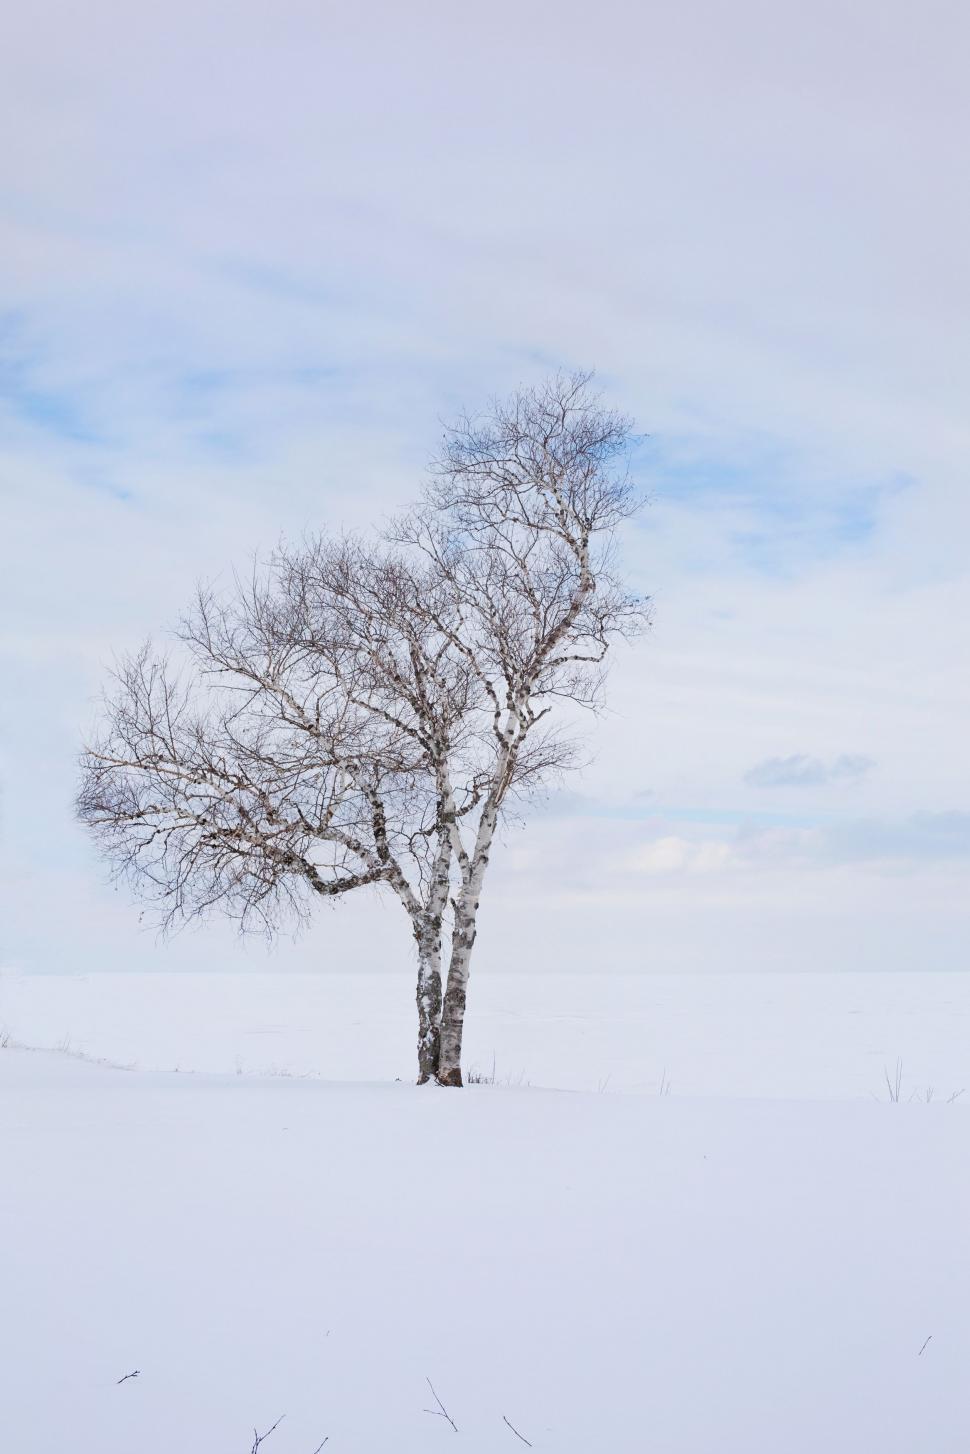 Free Image of Single Tree in Snow 